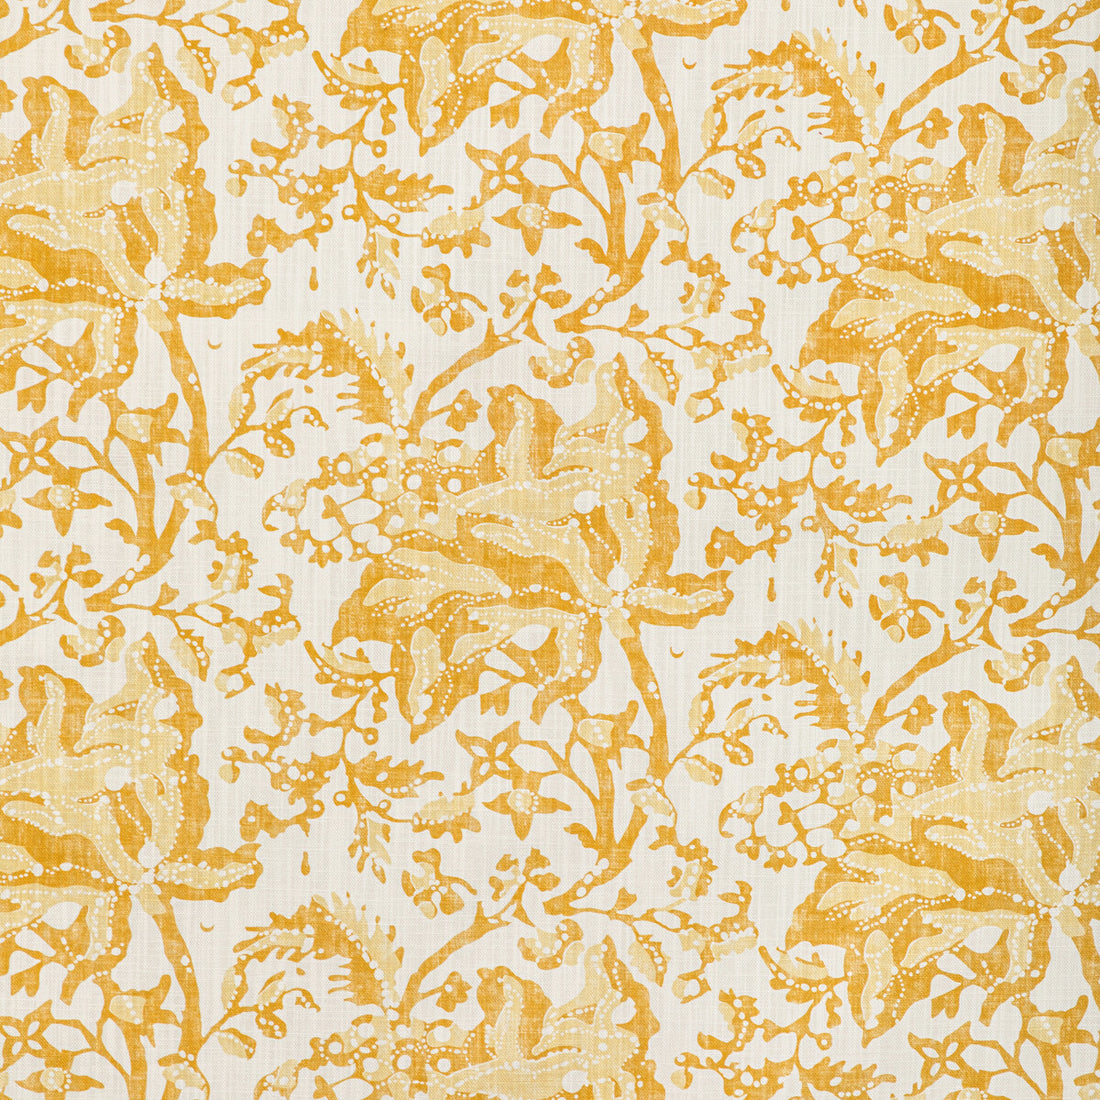 Weymouth Print fabric in canary color - pattern 8022102.40.0 - by Brunschwig &amp; Fils in the Manoir collection